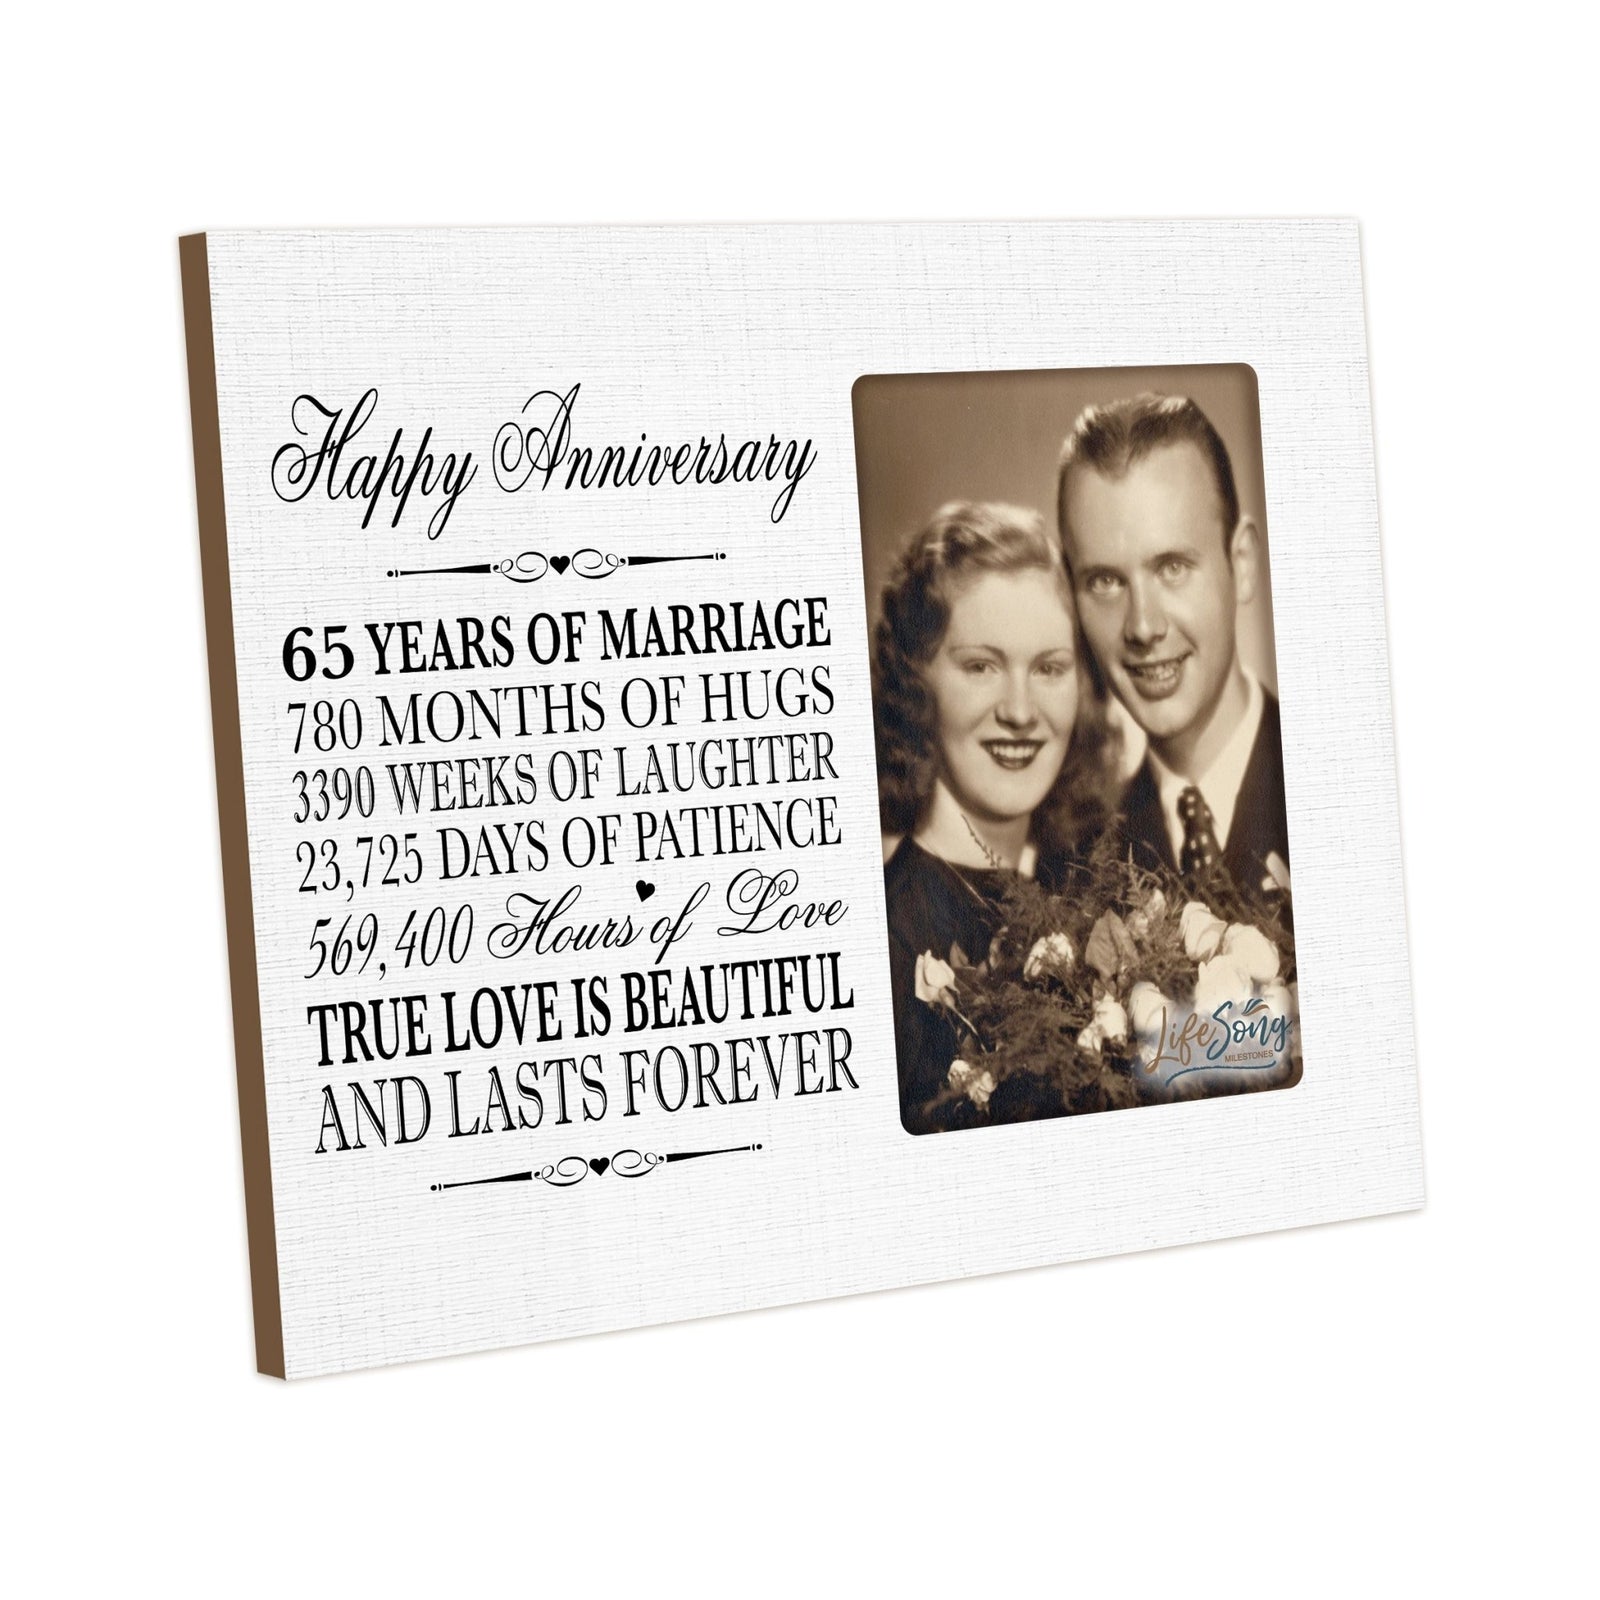 Couples Unique 65th Wedding Anniversary Photo Frame Decorations - True Love Is Beautiful - LifeSong Milestones